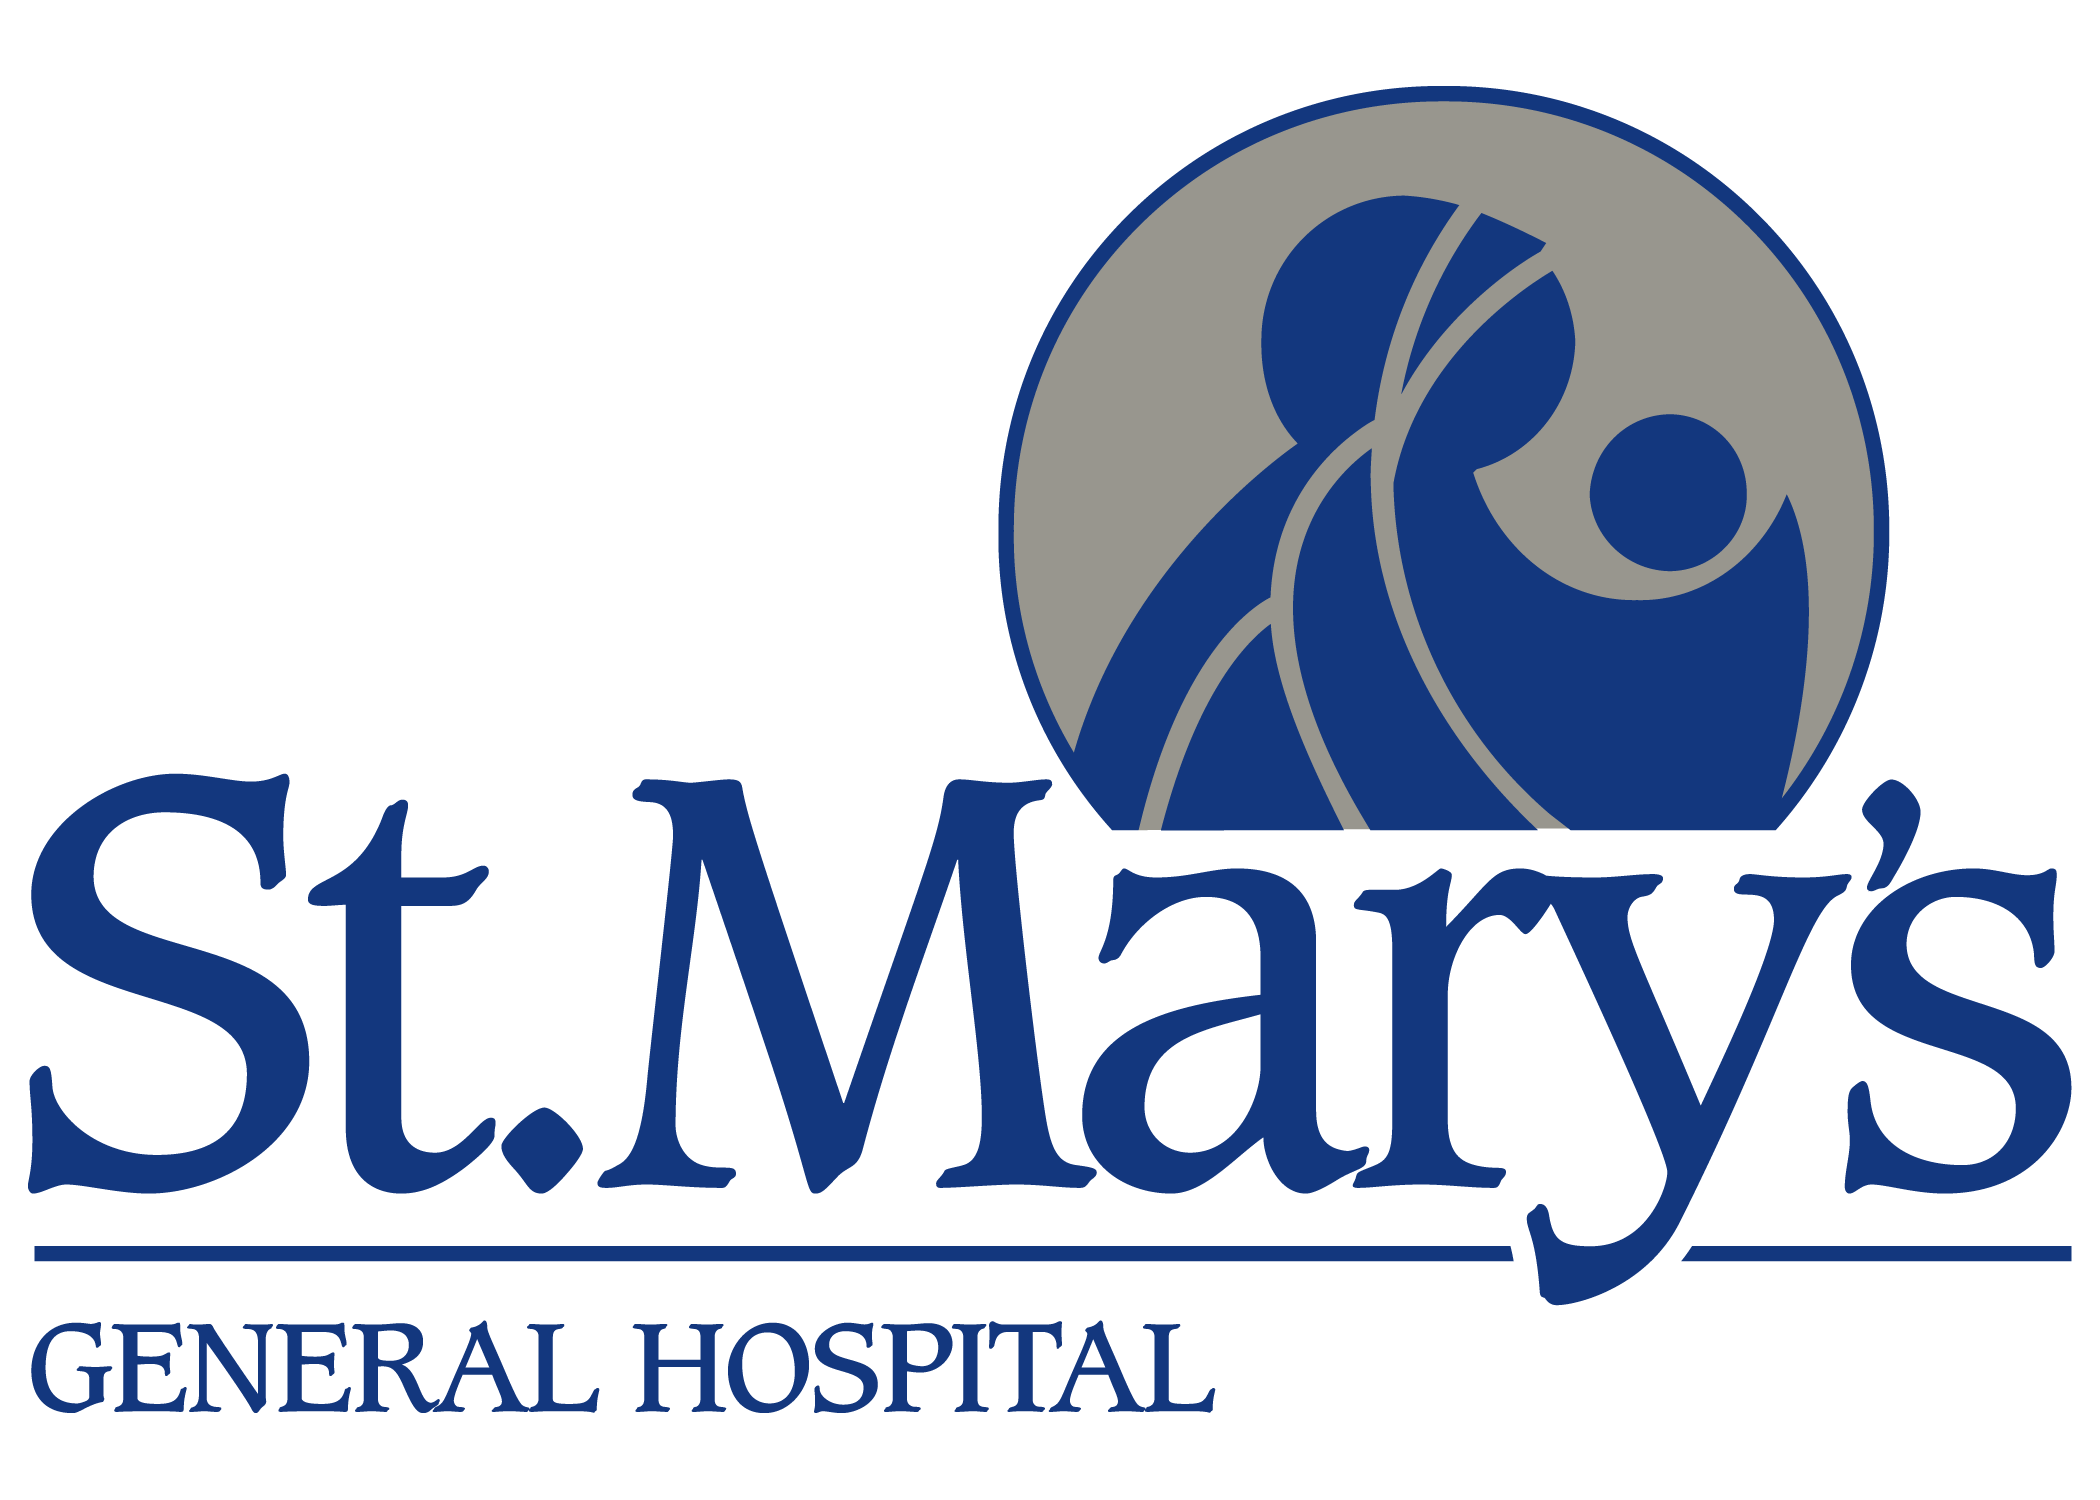 Planning Your Stay - St. Mary's General Hospital